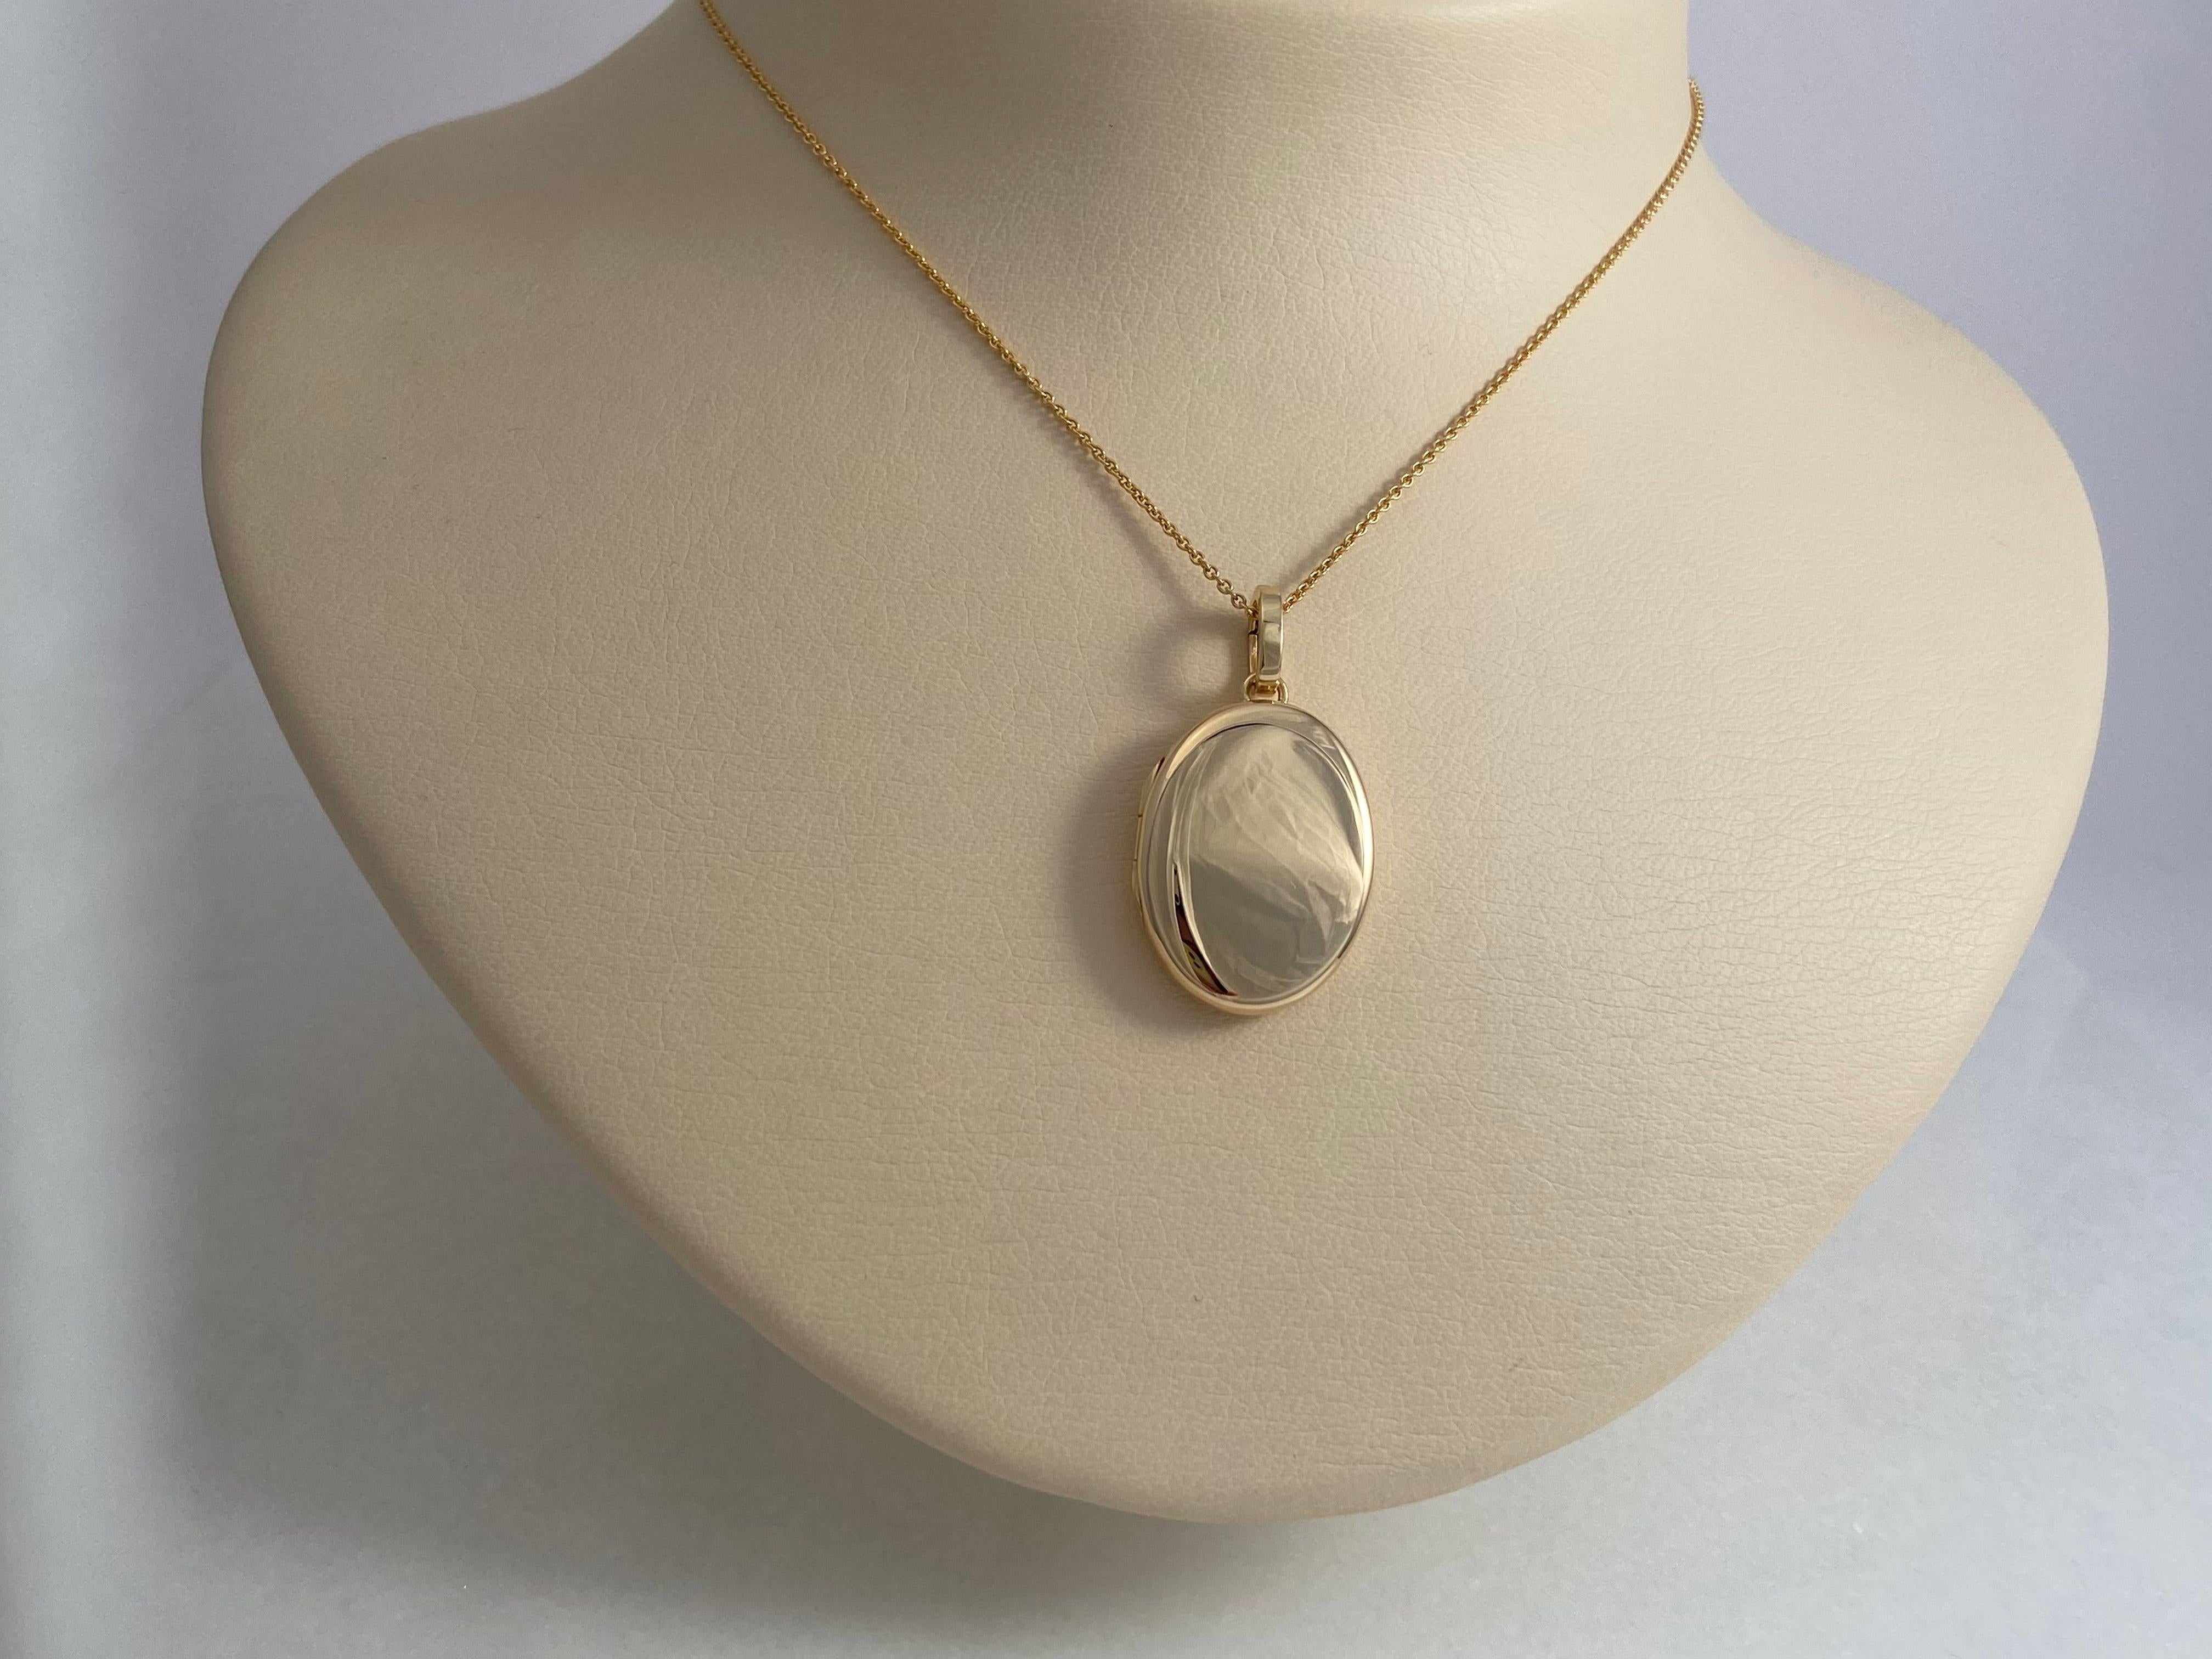 Oval Polished Locket Pendant Necklace - 18k Yellow Gold - 17 mm x 27 mm For Sale 1